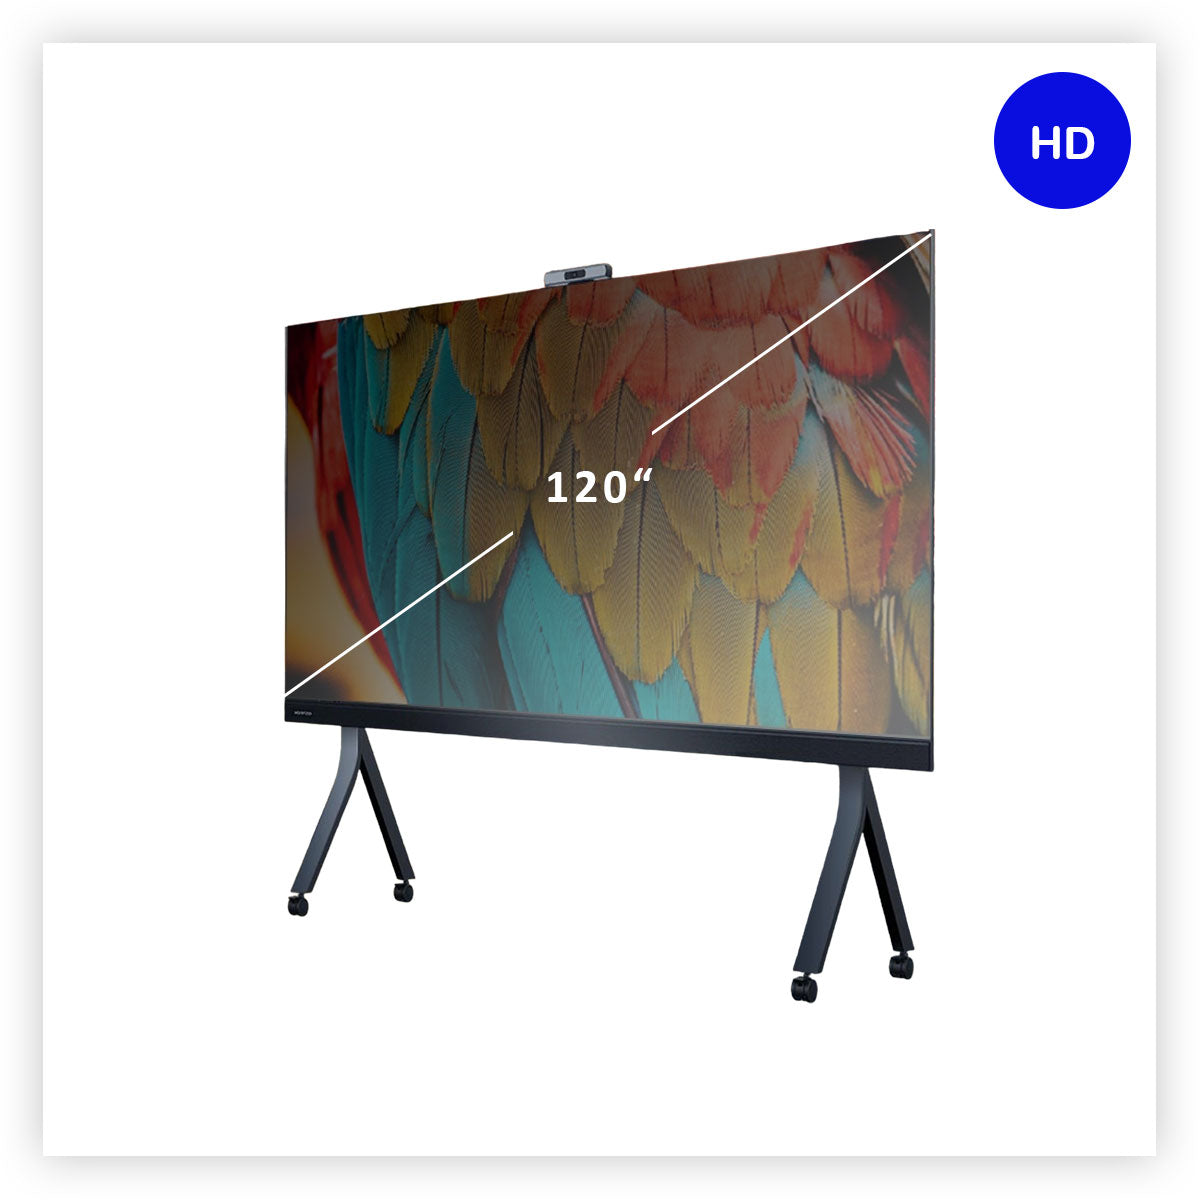 Majestic All-in-One HD 120" P1.38mm